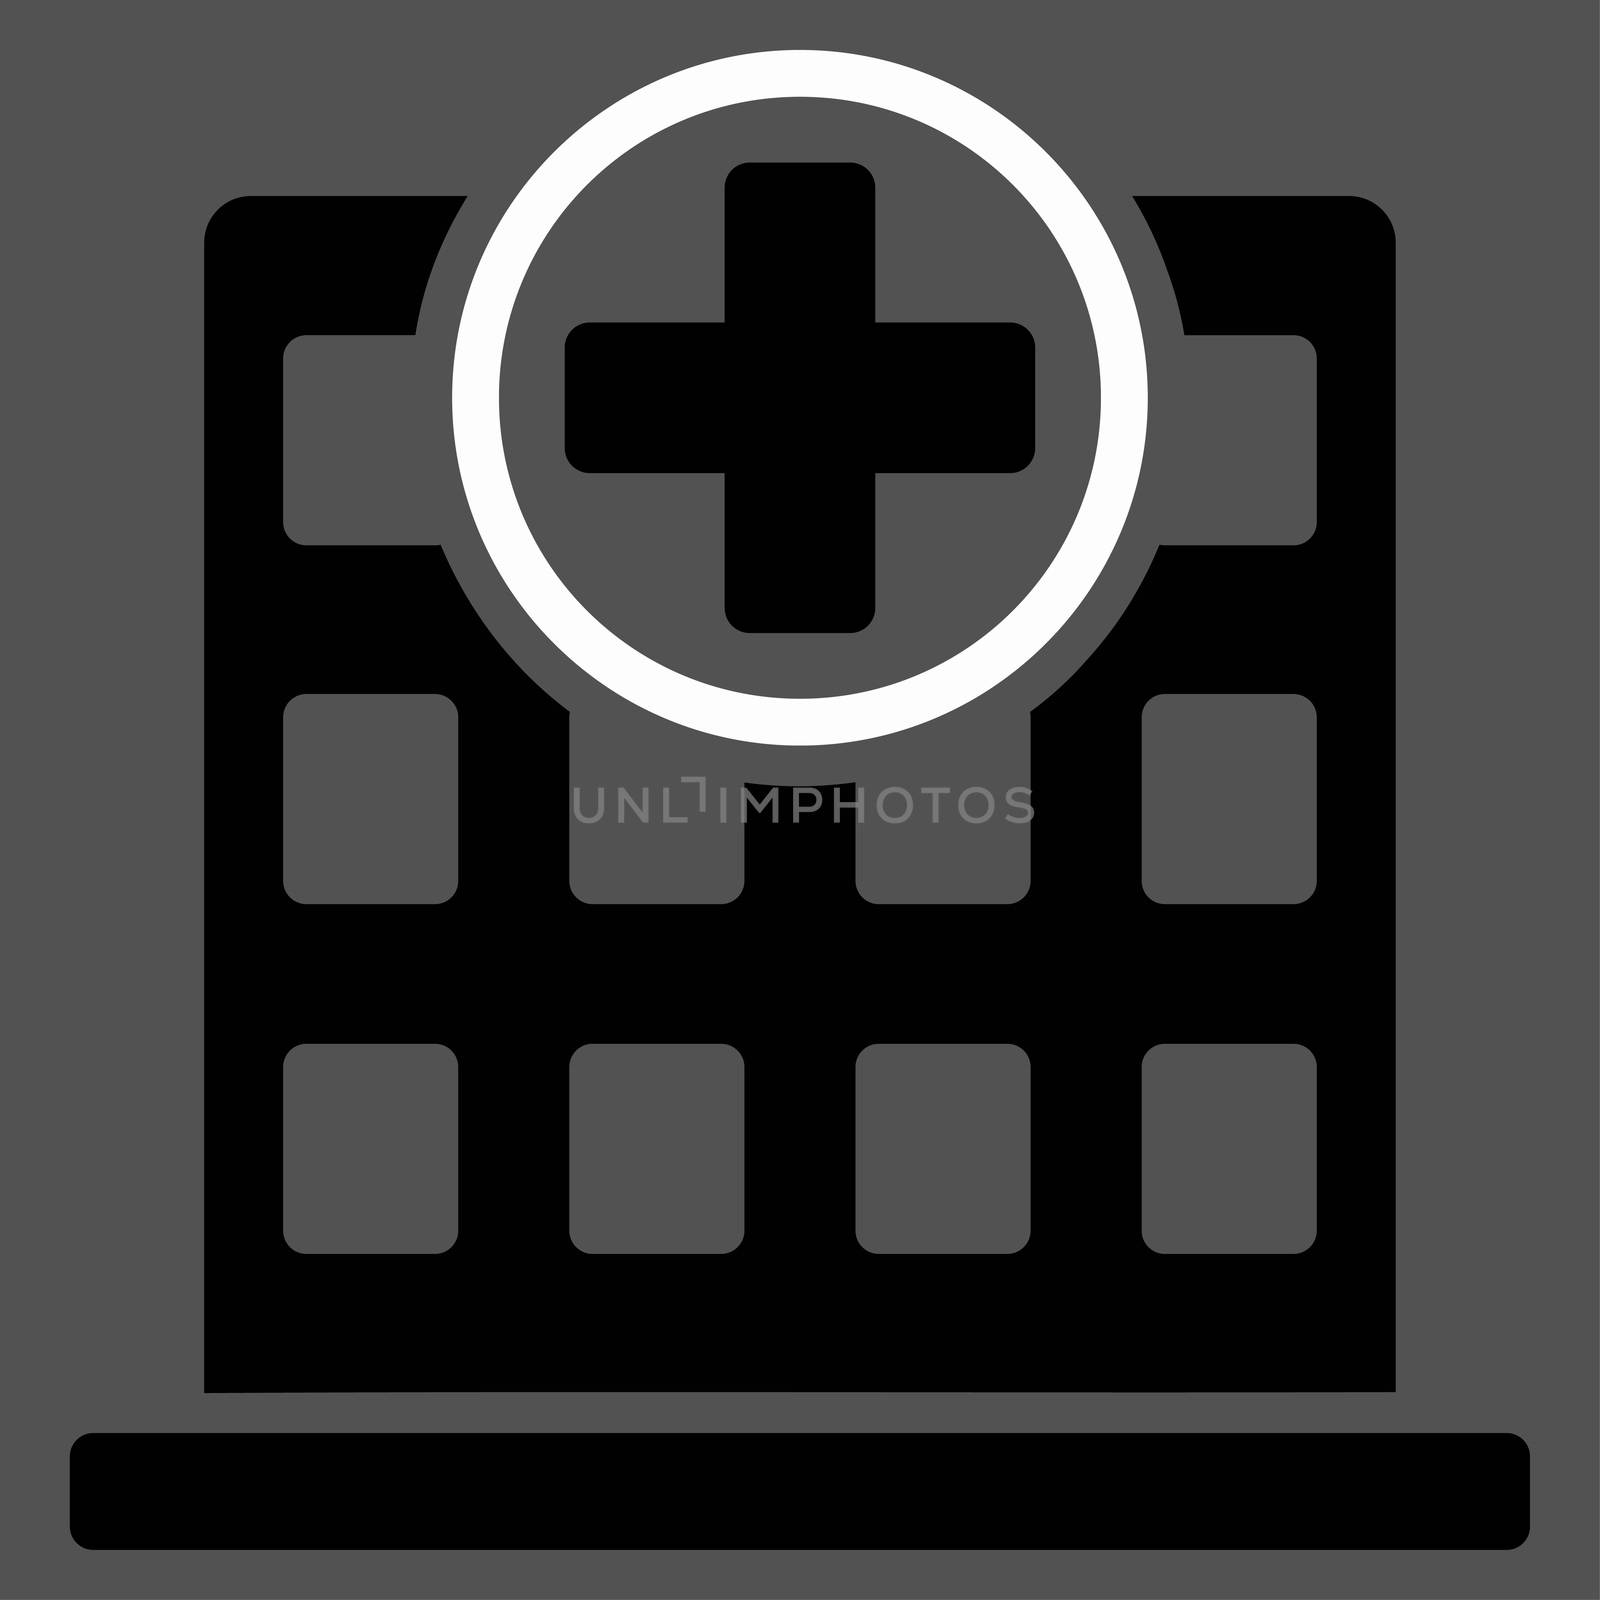 Clinic Building raster icon. Style is bicolor flat symbol, black and white colors, rounded angles, gray background.